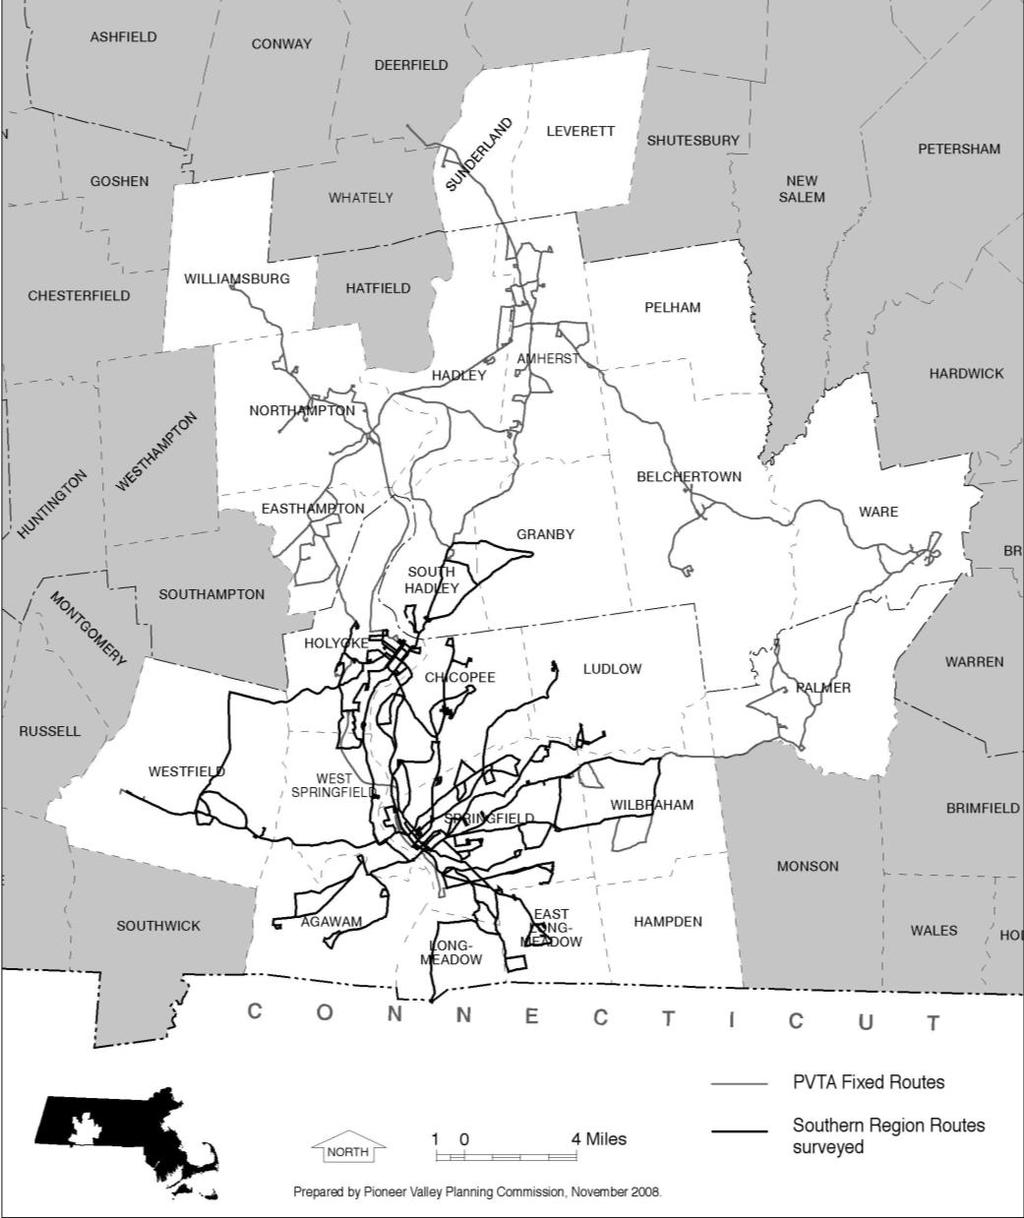 ATTACHMENT 1: PVTA SERVICE AREA AND OVERVIEW PVTA is the largest regional transit authority in Massachusetts.